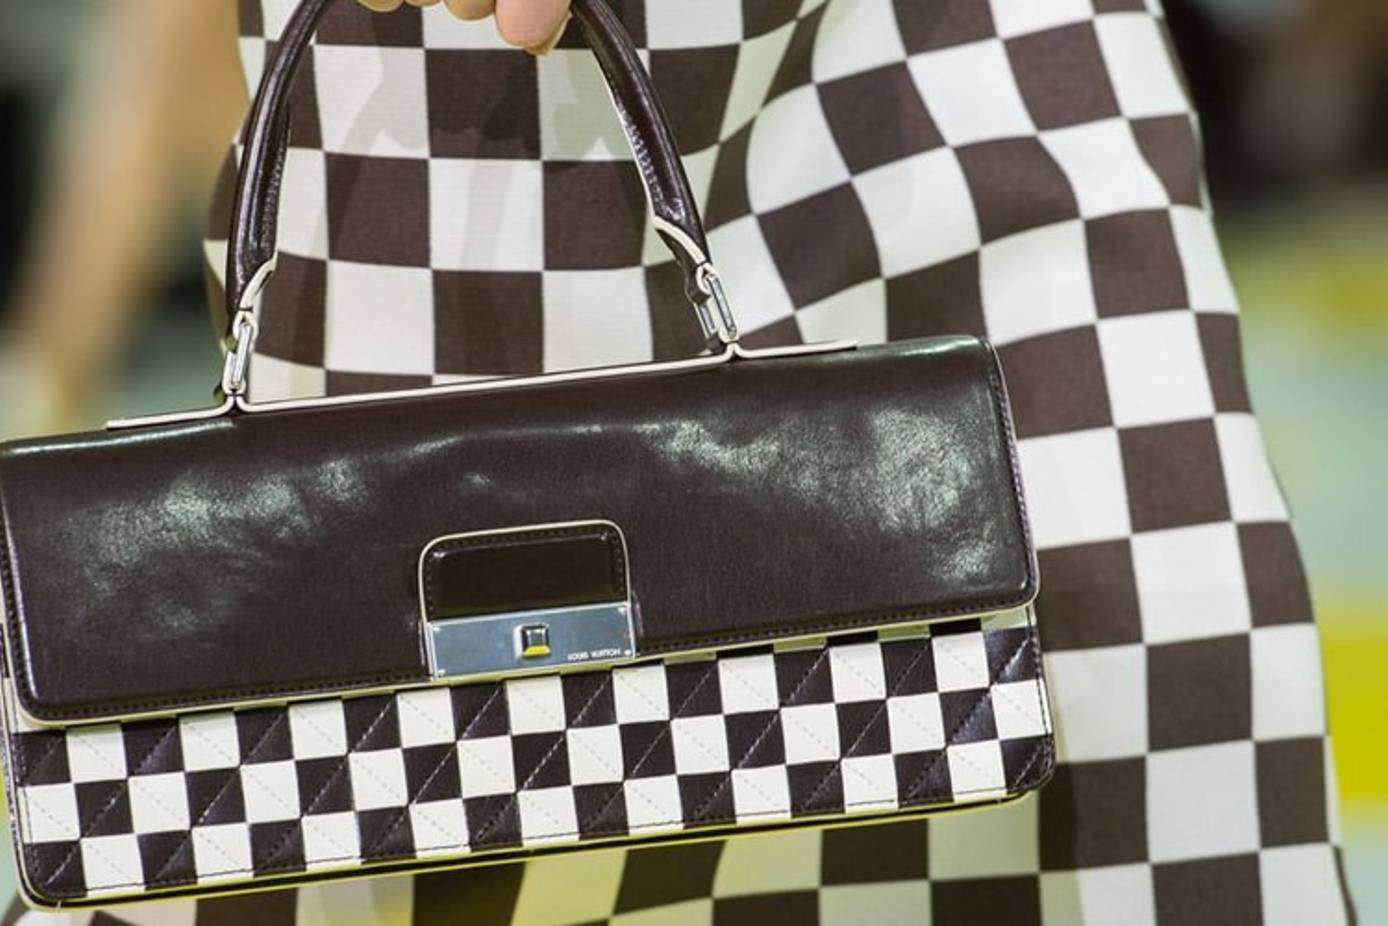 Louis Vuitton loses trademark rights to its Damier print